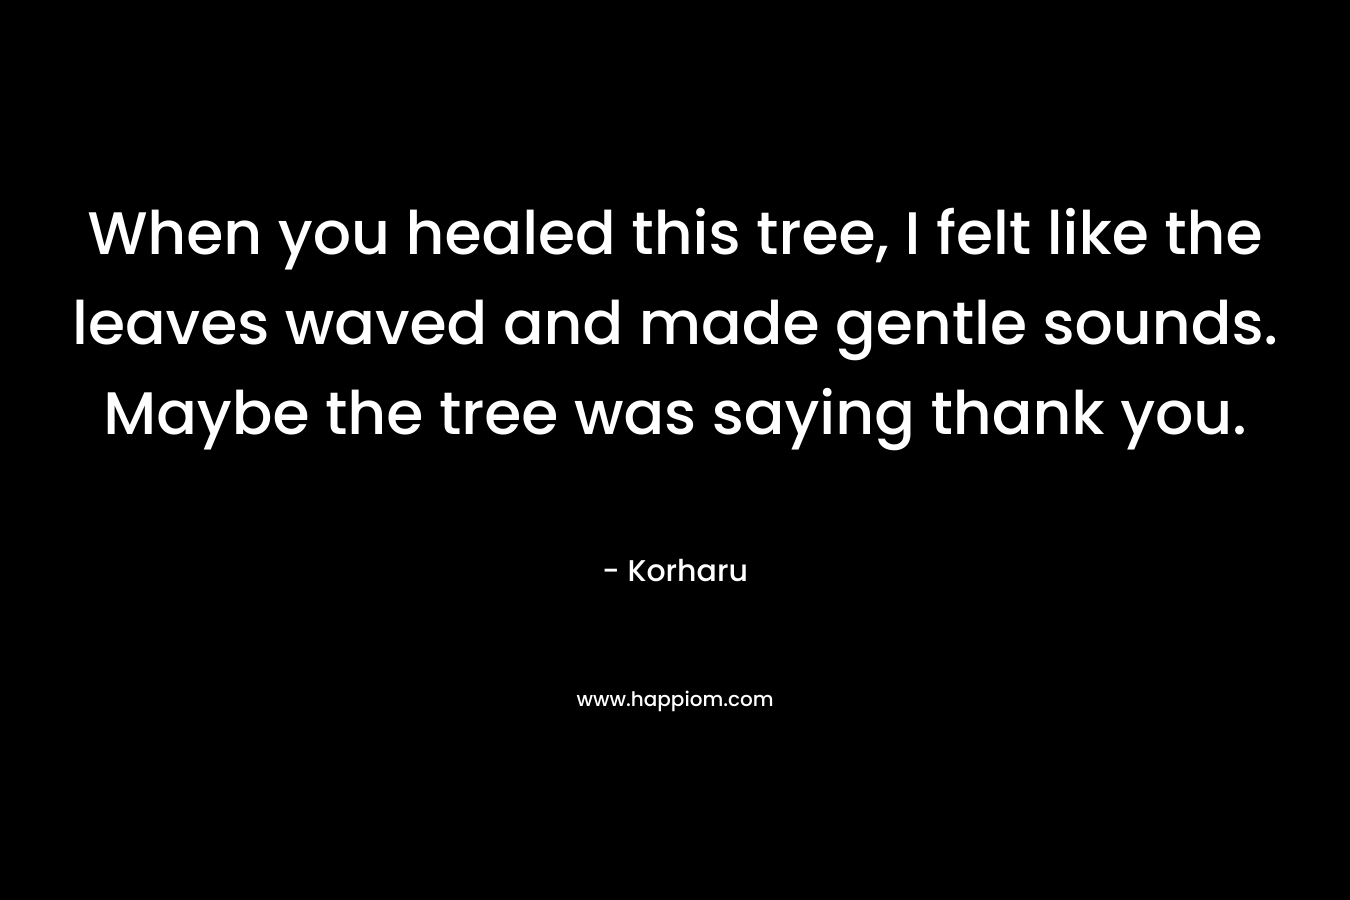 When you healed this tree, I felt like the leaves waved and made gentle sounds. Maybe the tree was saying thank you.